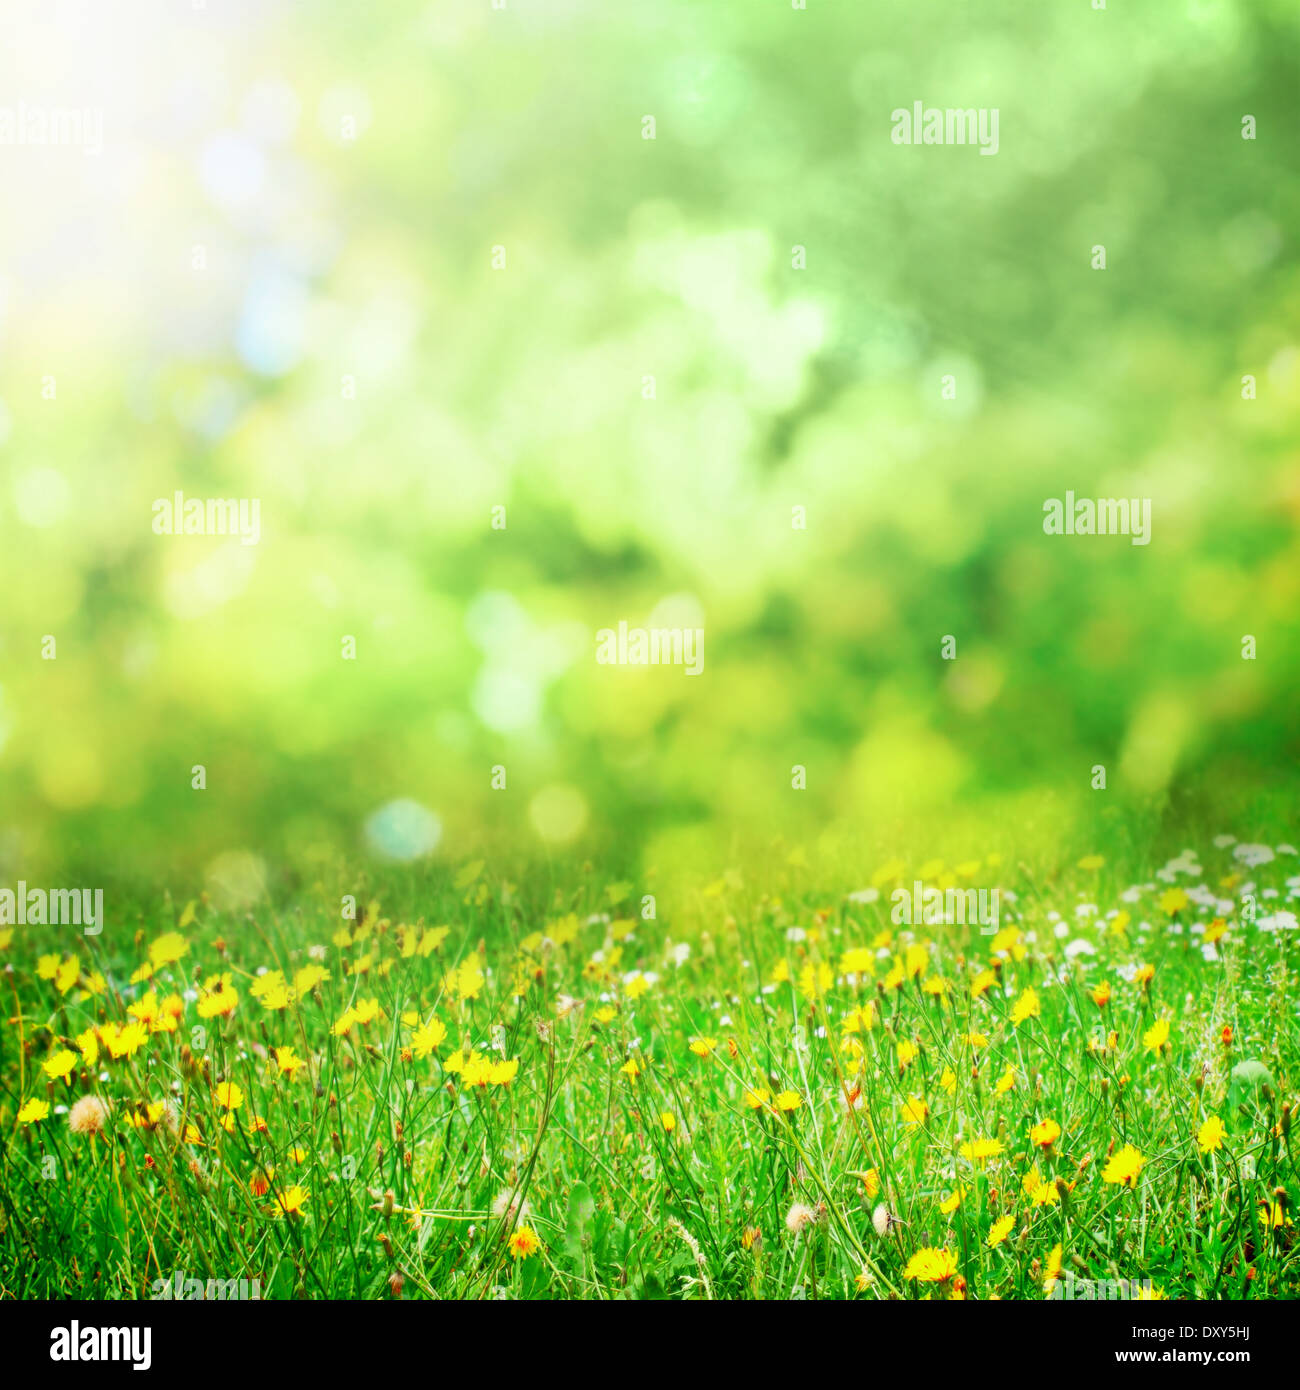 Sunny flower meadow background Banque D'Images